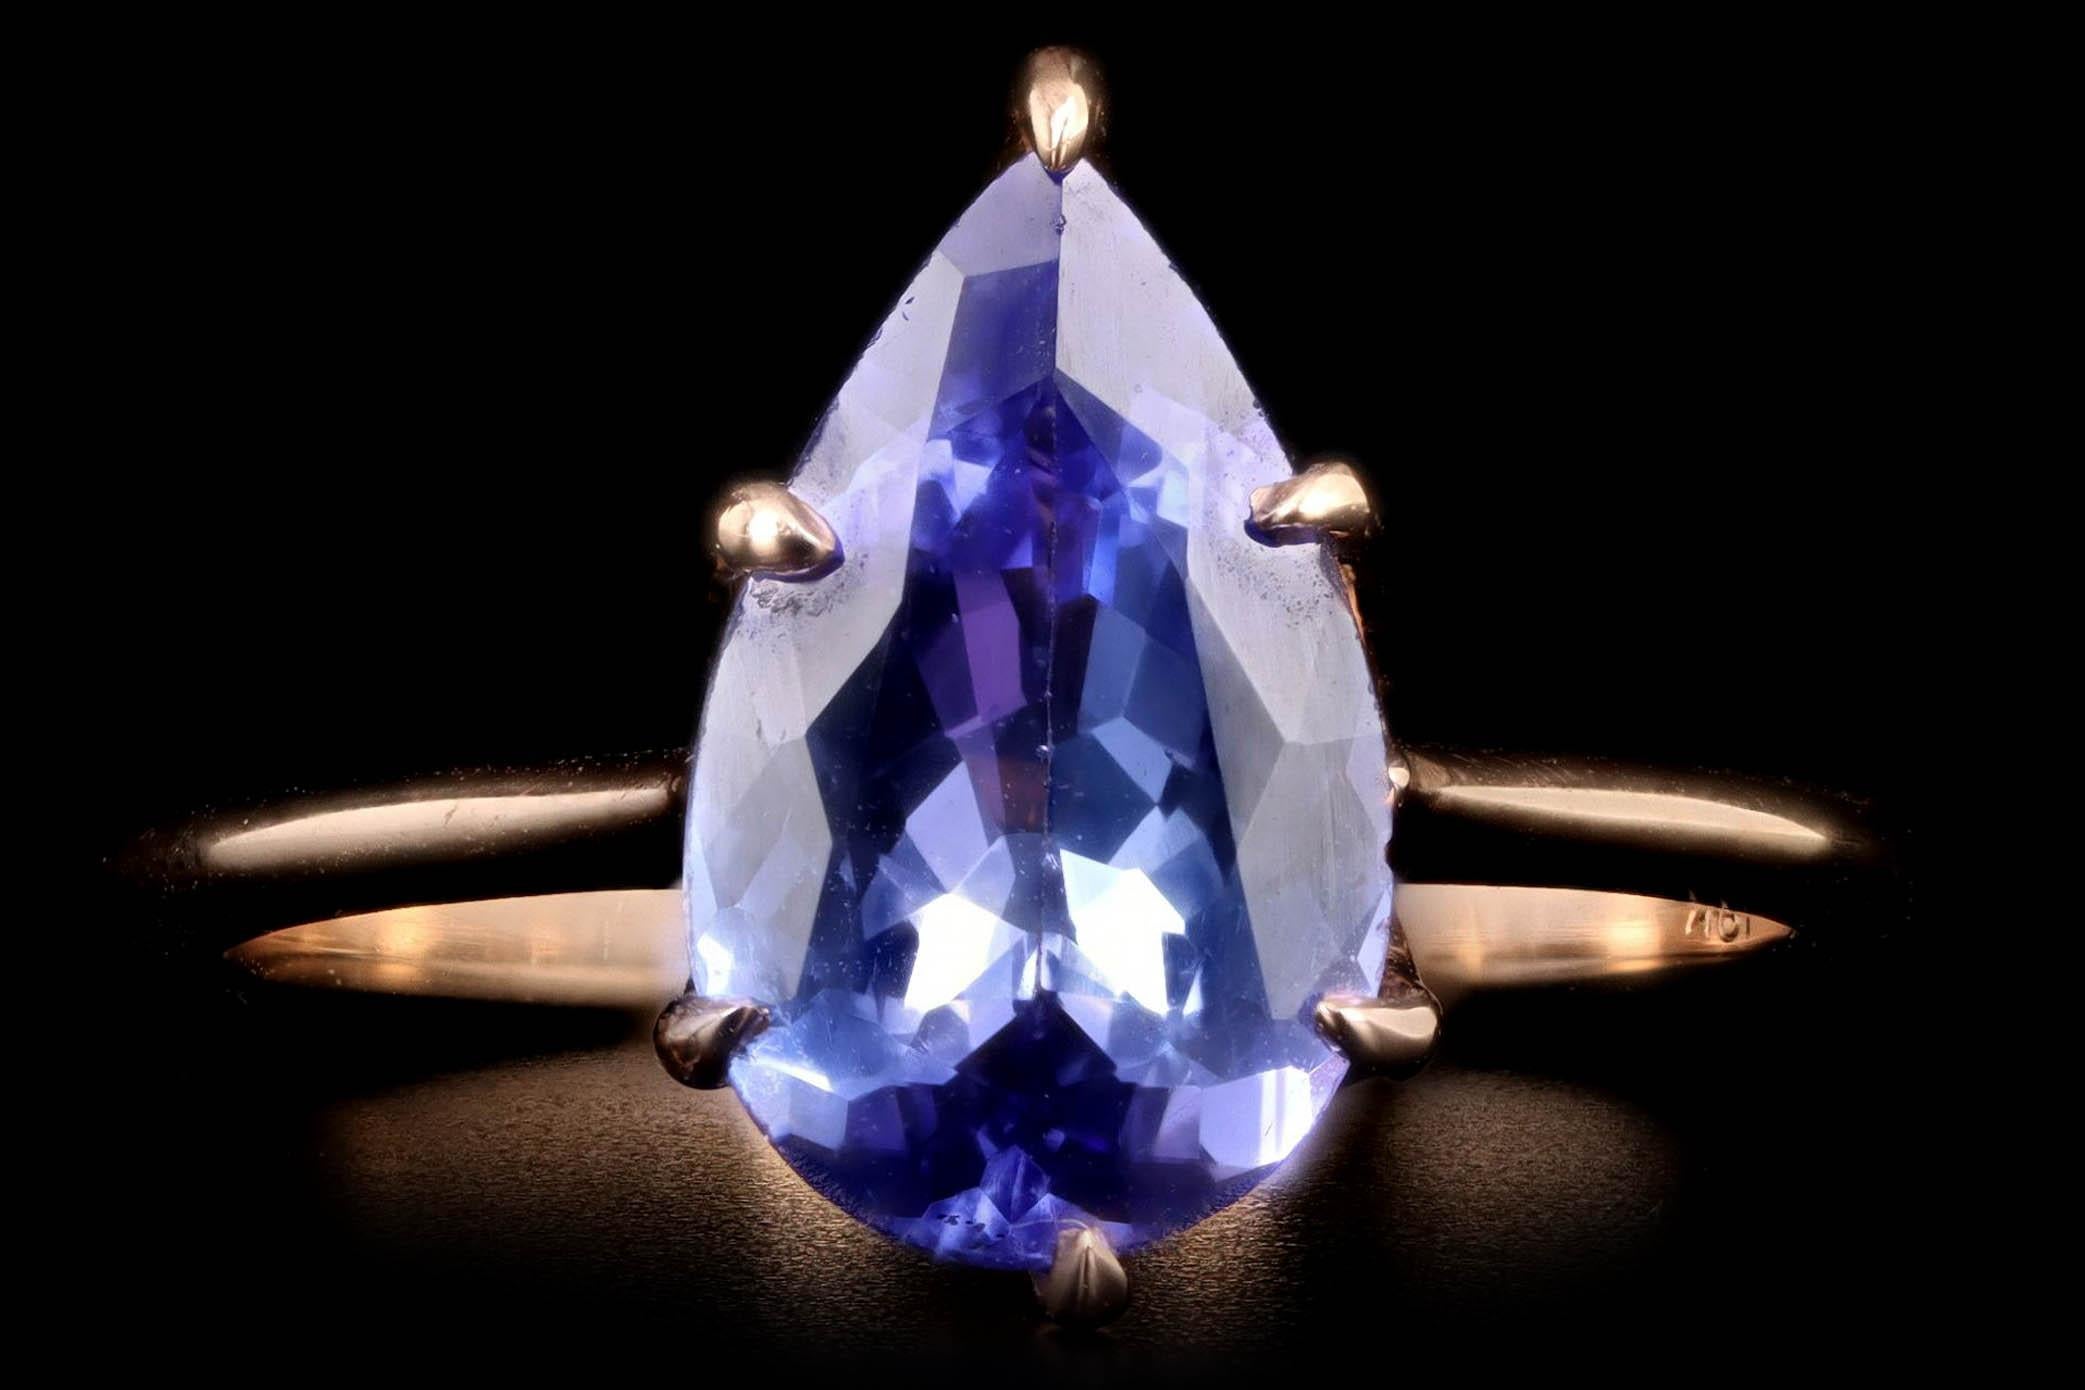 Era: New Vintage Inspired

Composition: 18K Rose Gold

Primary Stone: Pear Cut Tanzanite

Carat Weight: Approximately 2.14 Carats

Ring Size: 6.5

Ring Weight: 3.1 Grams

Item Barcode: 495846